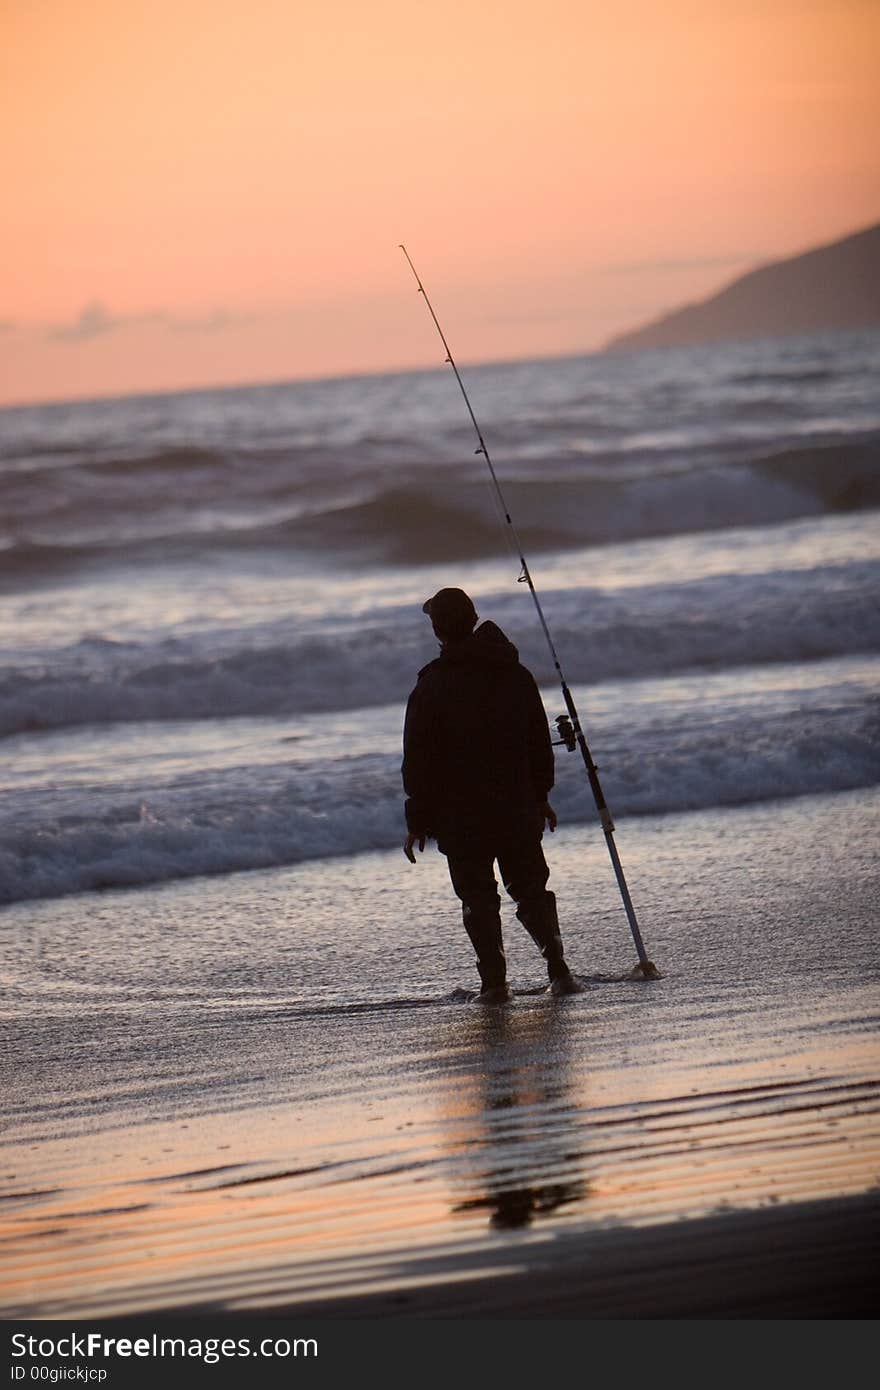 Silhouette of man fishing in the ocean from the beach at sunset.